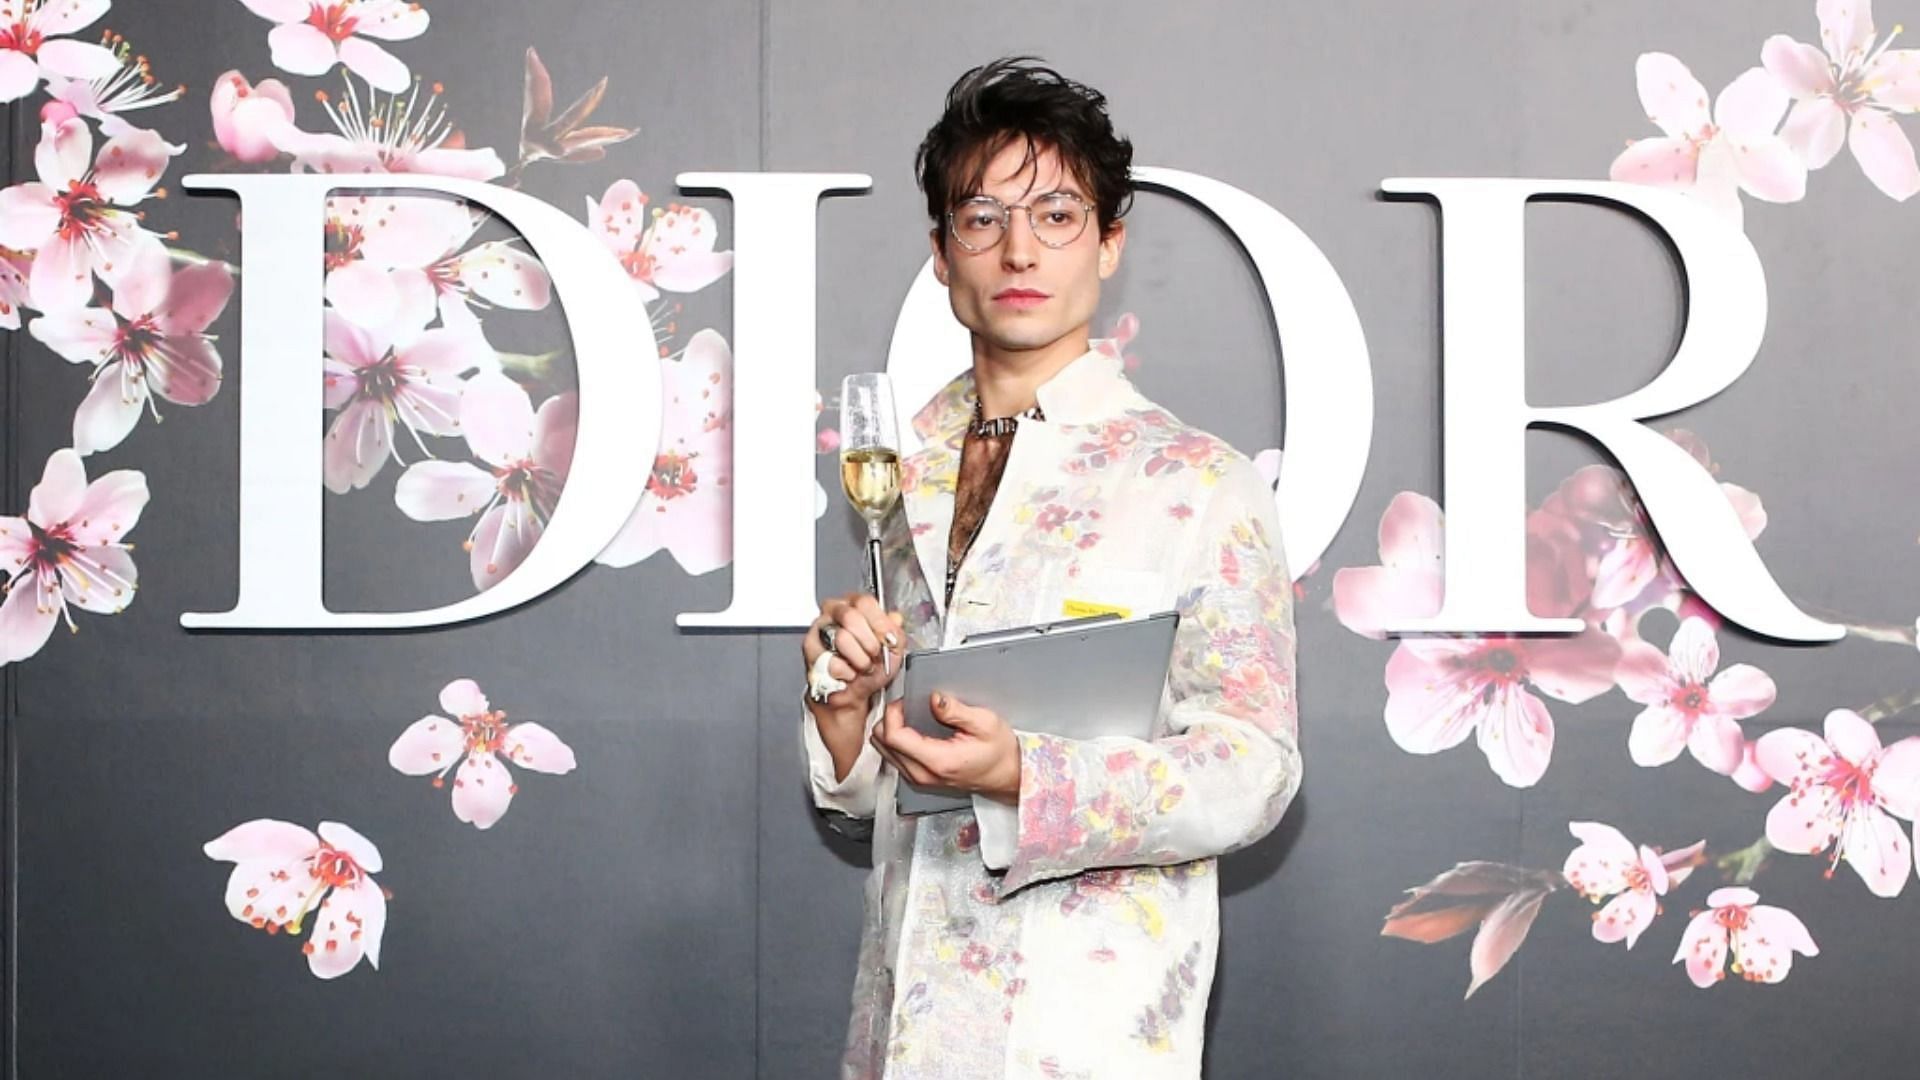 Ezra Miller was previously arrested for assaulting people at a karaoke bar in Hawaii. (Image via Getty Images for Dior)